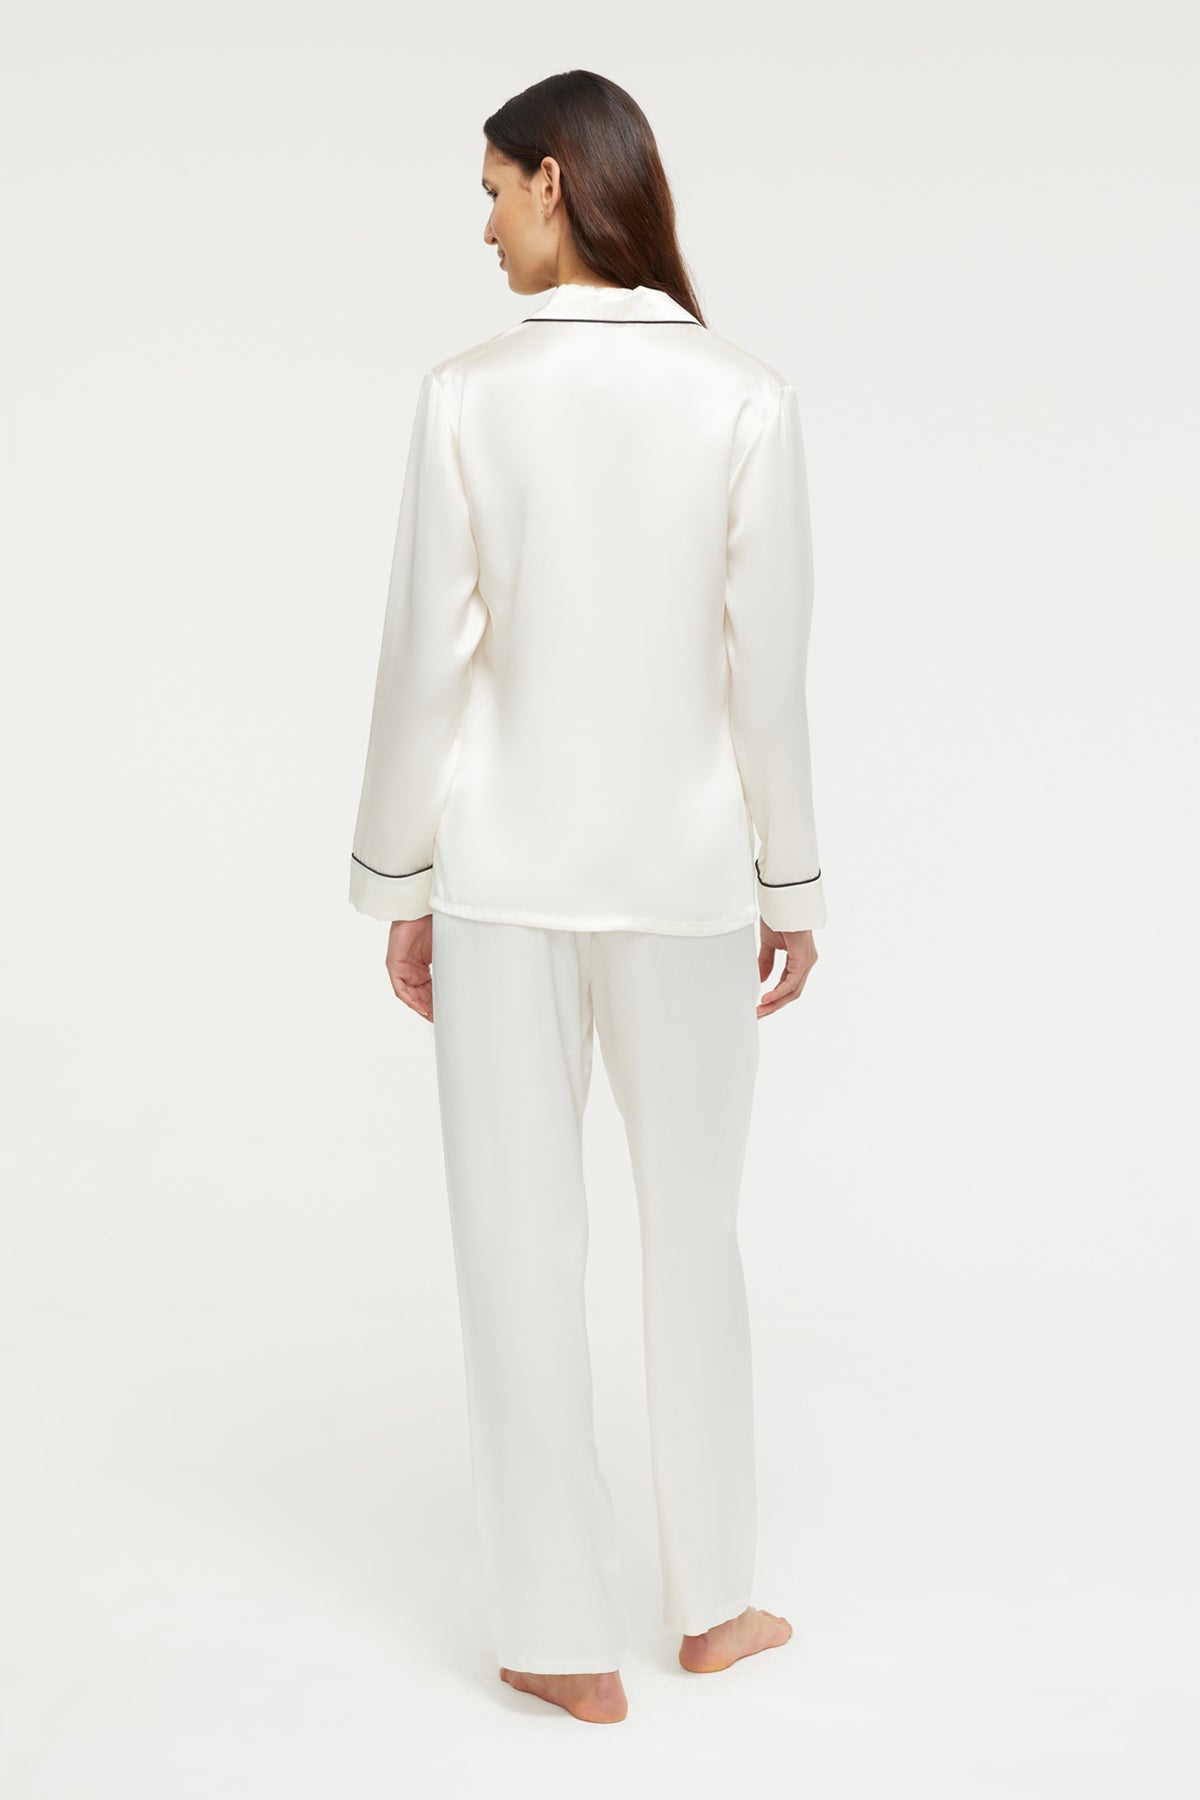 The Fine Finishes Pyjama in Creme is a Ginia Sleepwear signature piece and part of our Silk Basics collection. 